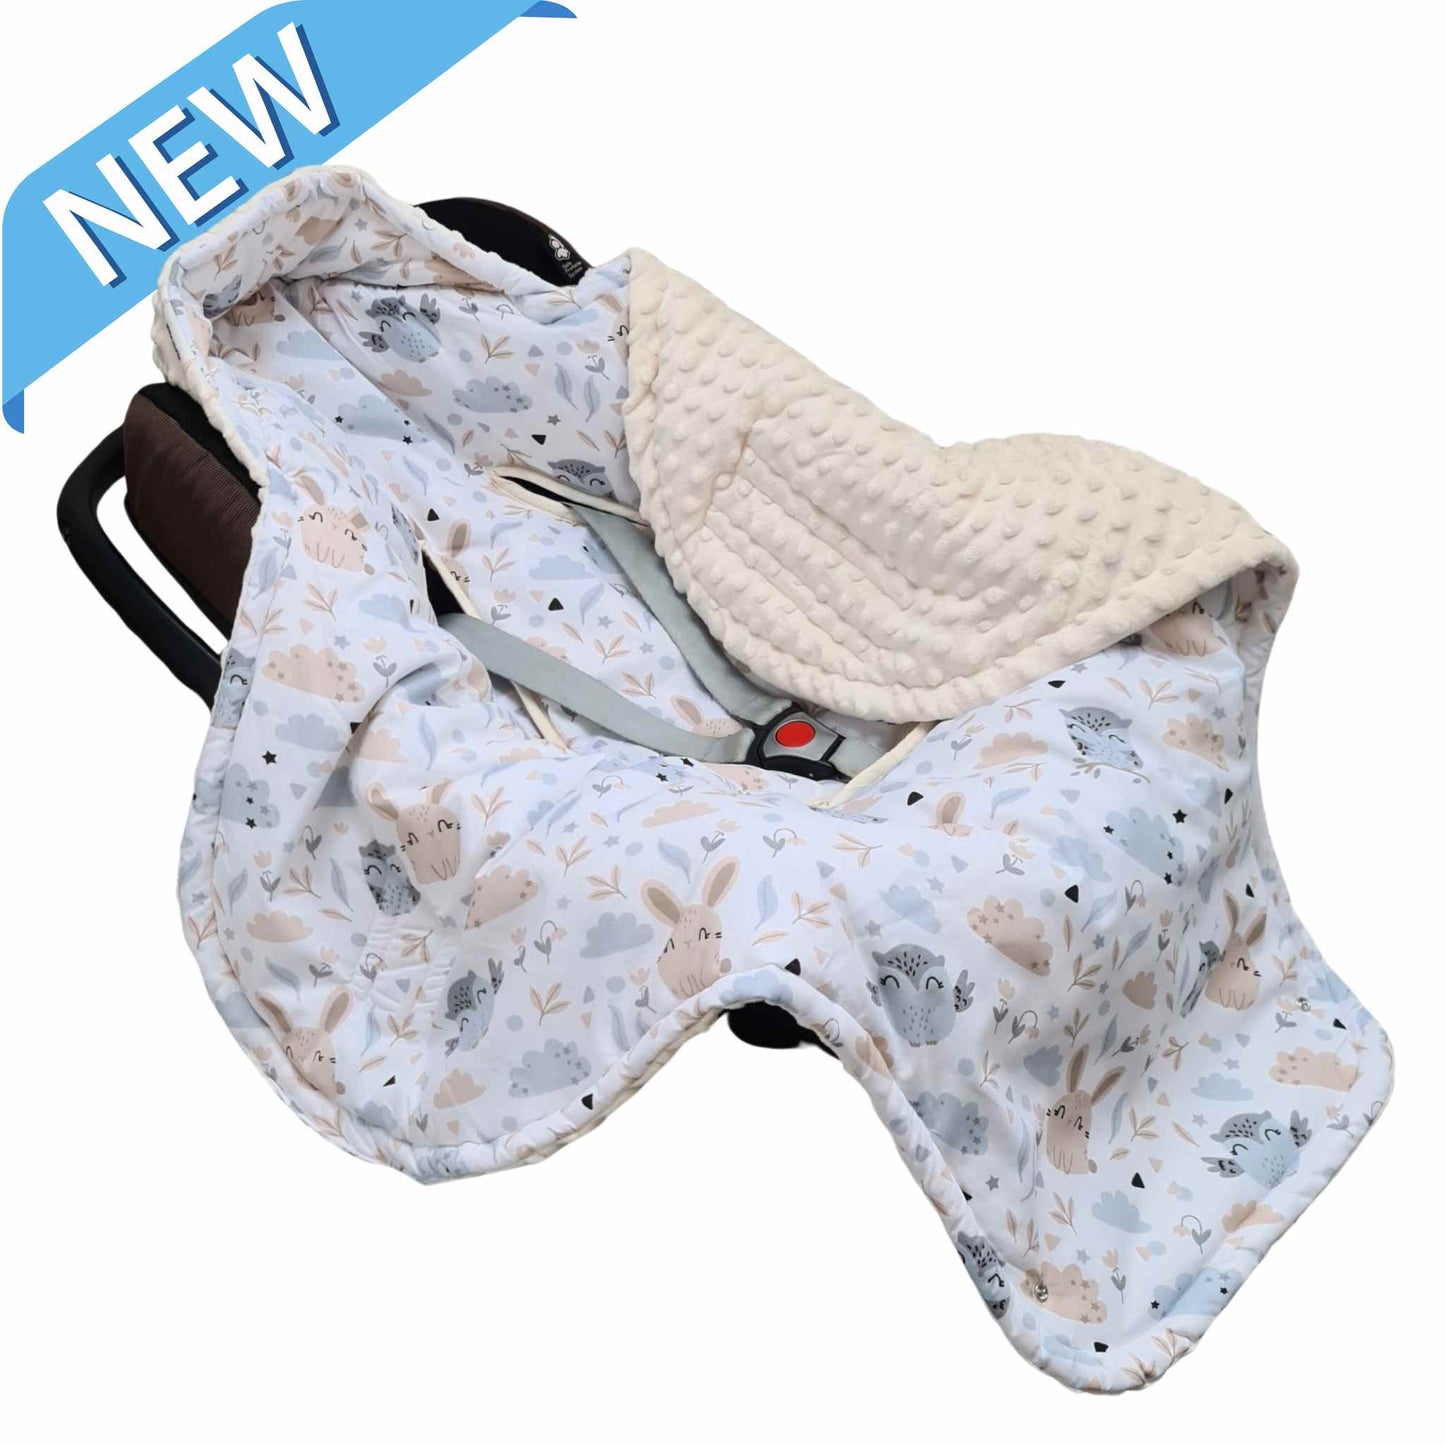 Universal car seat blanket infants 0-12 months owls bunnies pattern with cream plush